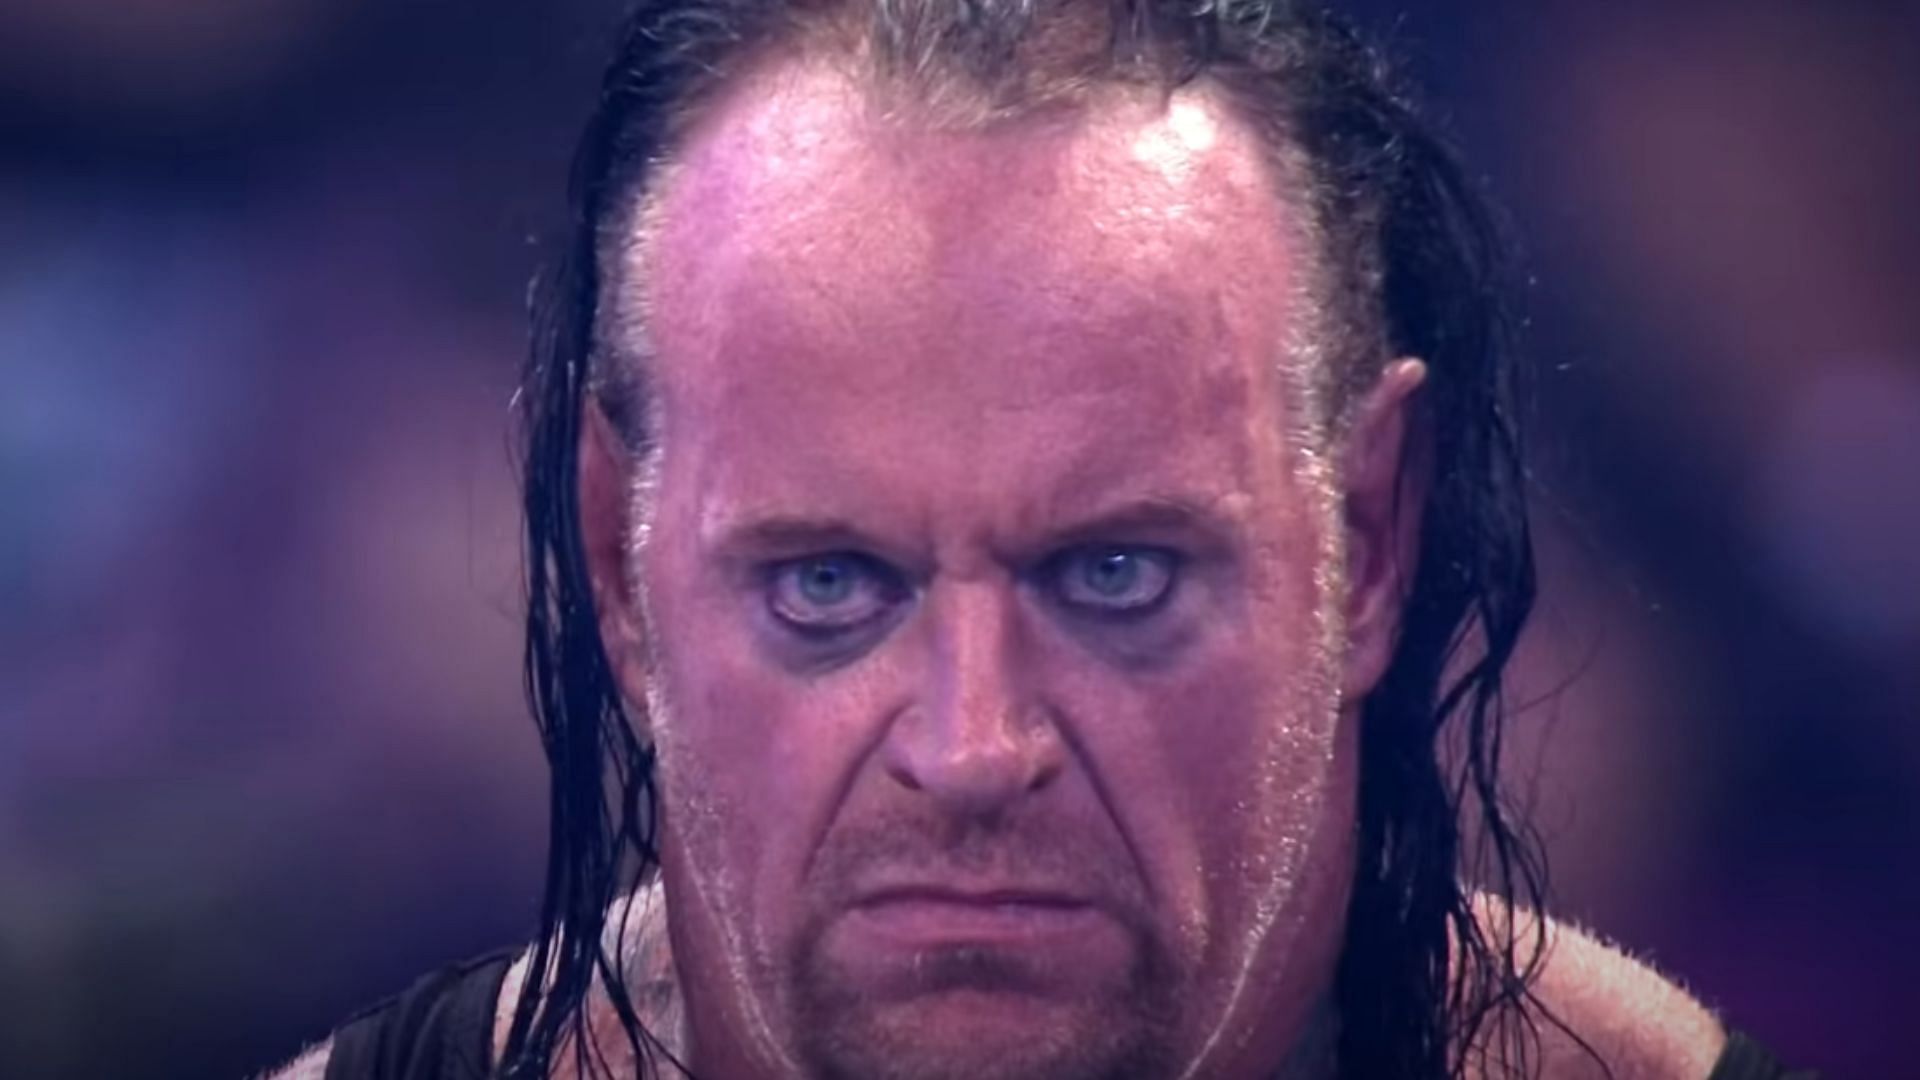 The Undertaker joined the WWE Hall of Fame in 2022.